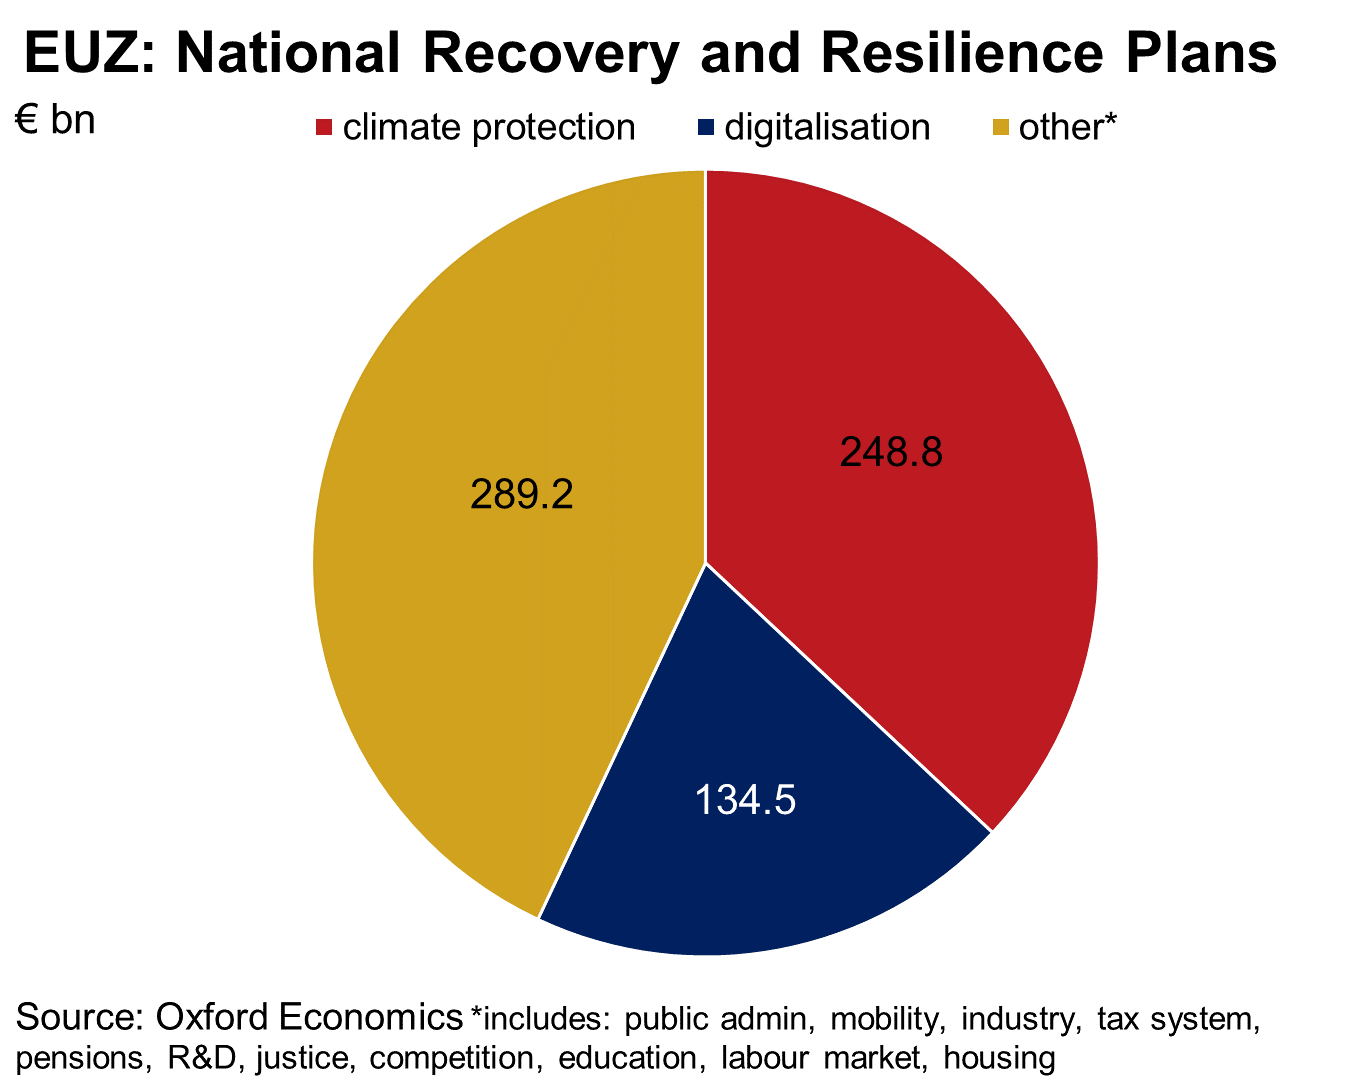 EUZ National Recovery and Resilience Plans